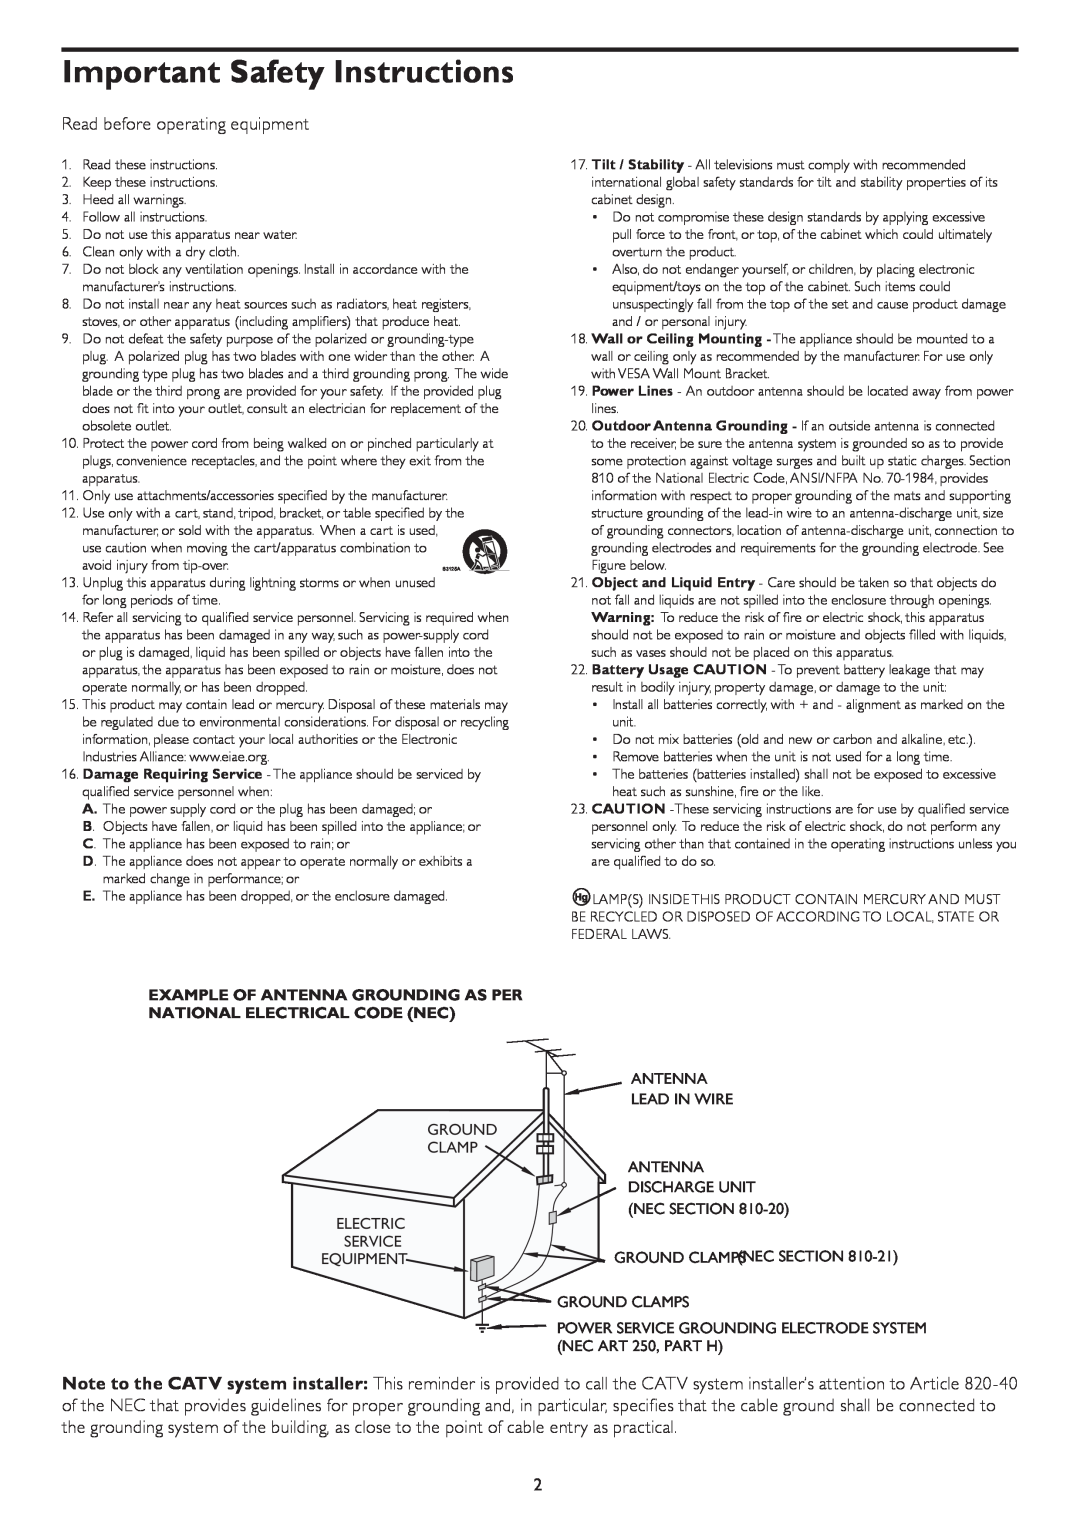 Philips 37HFL4482F Important Safety Instructions, Example Of Antenna Grounding As Per National Electrical Code Nec 